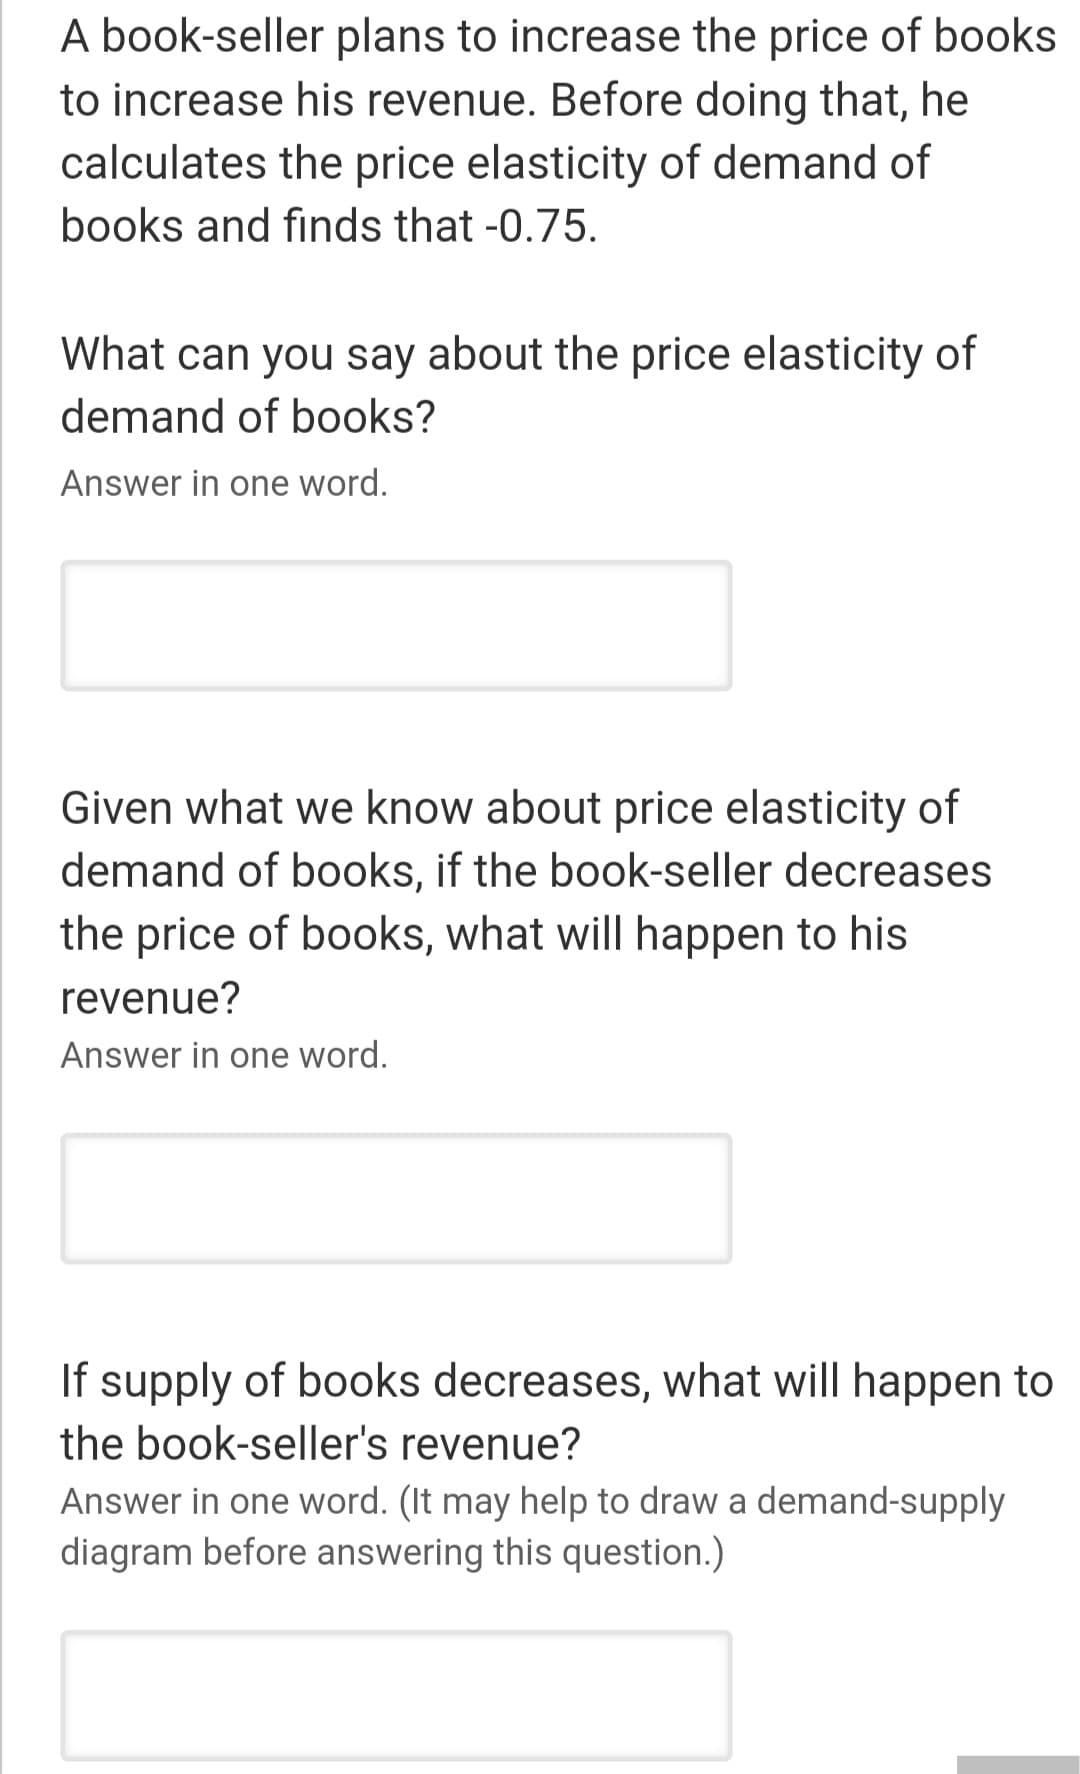 A book-seller plans to increase the price of books
to increase his revenue. Before doing that, he
calculates the price elasticity of demand of
books and finds that -0.75.
What can you say about the price elasticity of
demand of books?
Answer in one word.
Given what we know about price elasticity of
demand of books, if the book-seller decreases
the price of books, what will happen to his
revenue?
Answer in one word.
If supply of books decreases, what will happen to
the book-seller's revenue?
Answer in one word. (It may help to draw a demand-supply
diagram before answering this question.)
